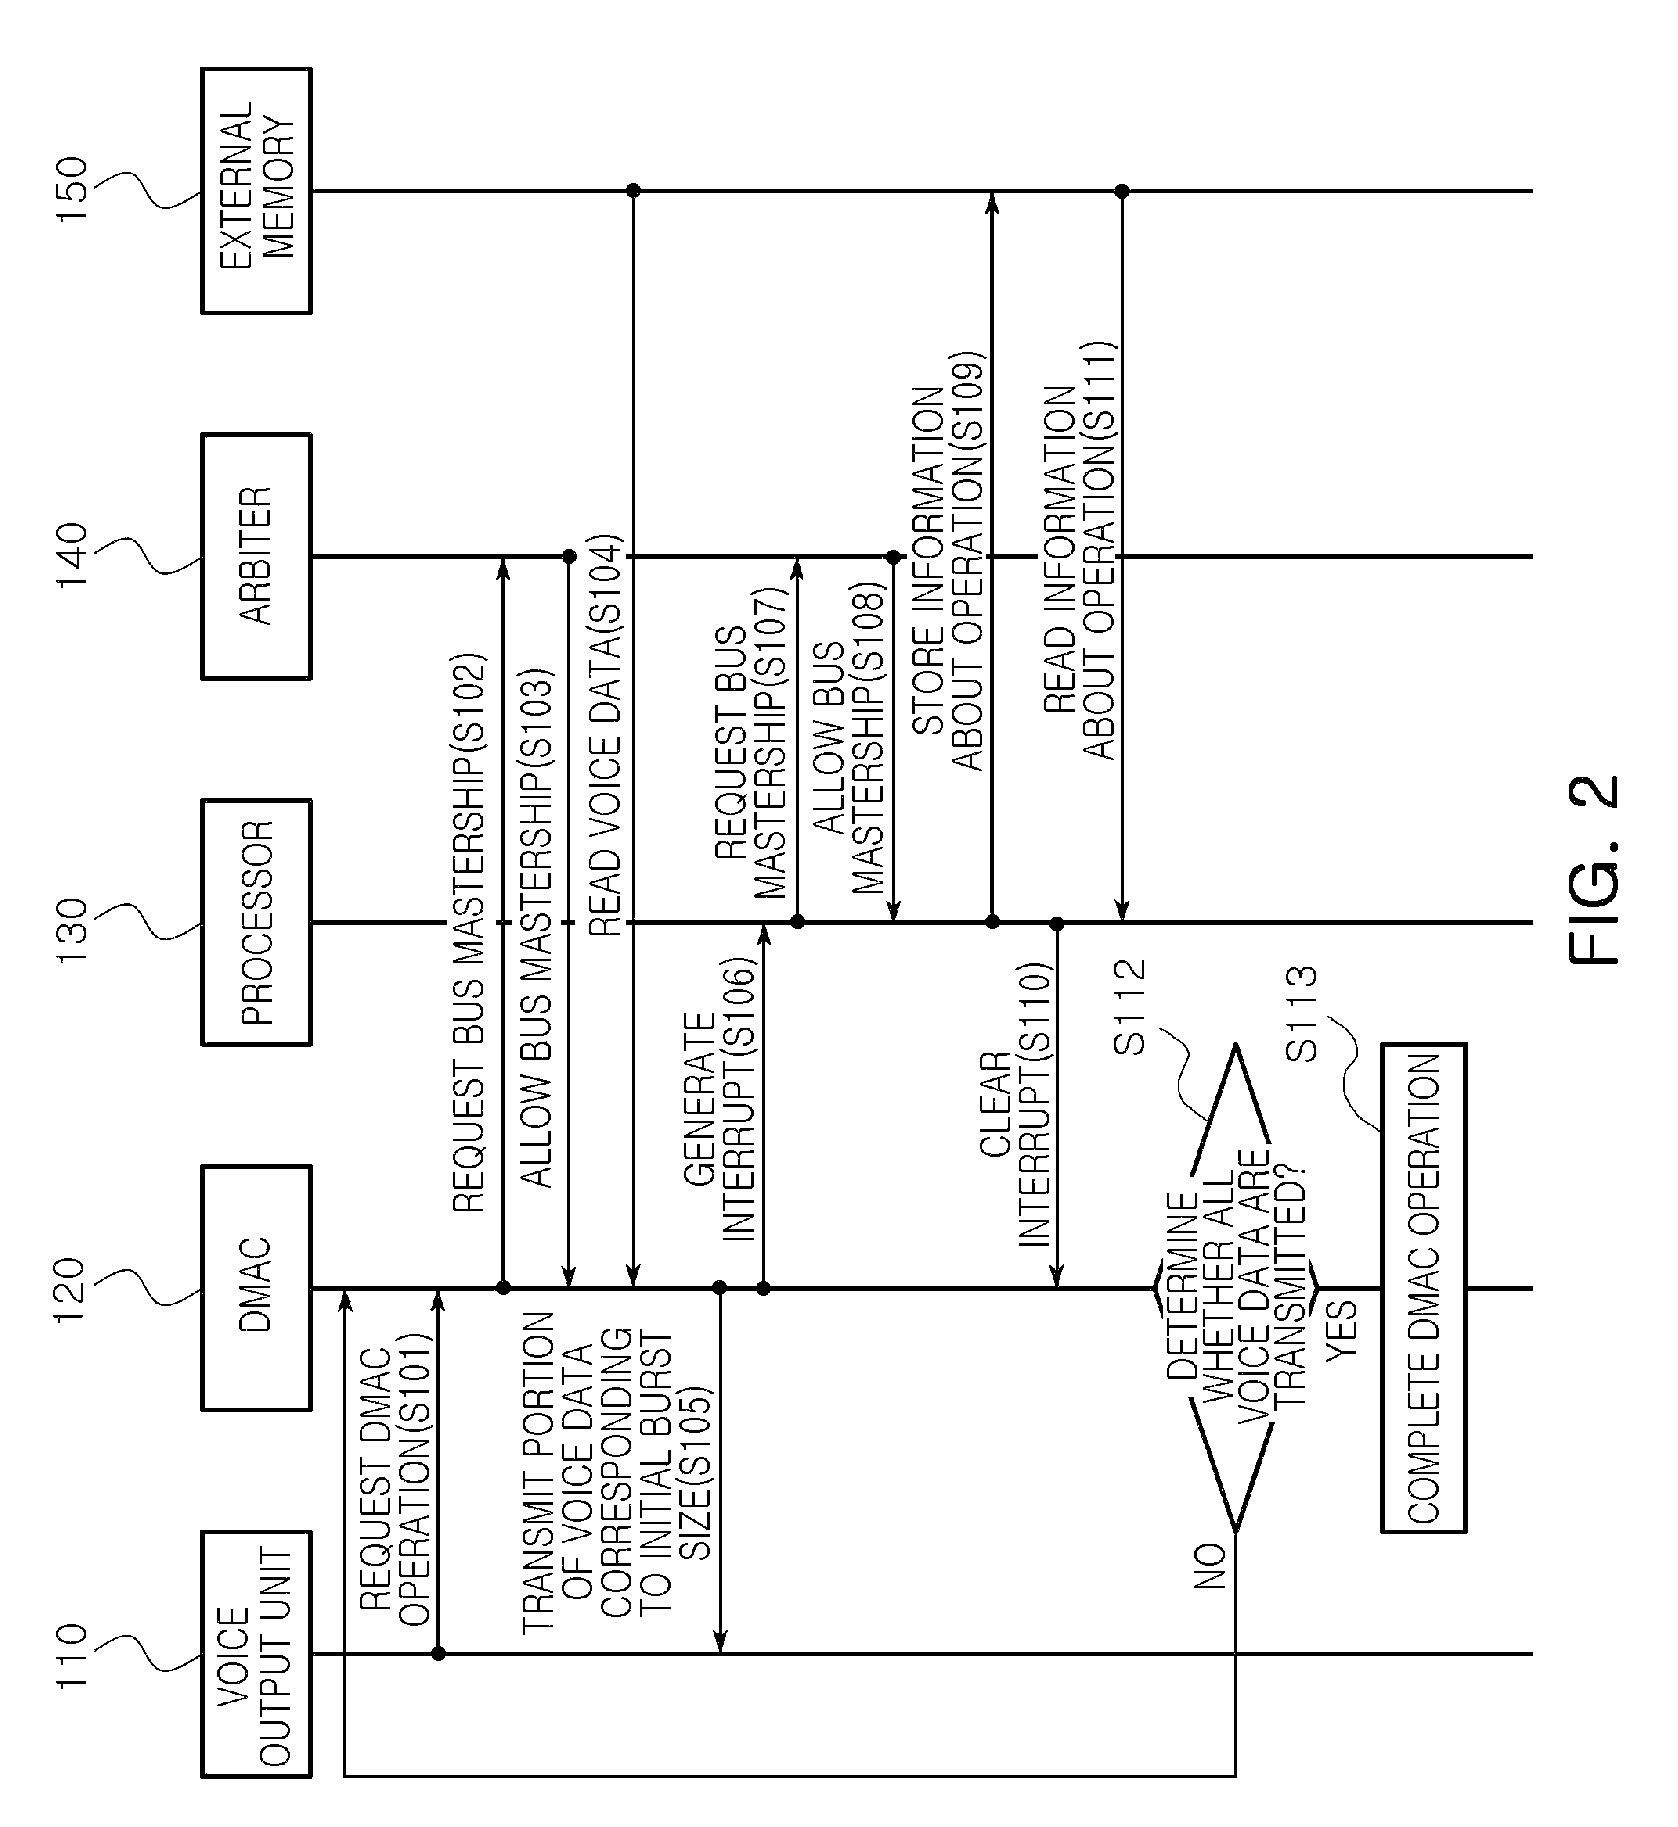 Method and apparatus for controlling direct memory access